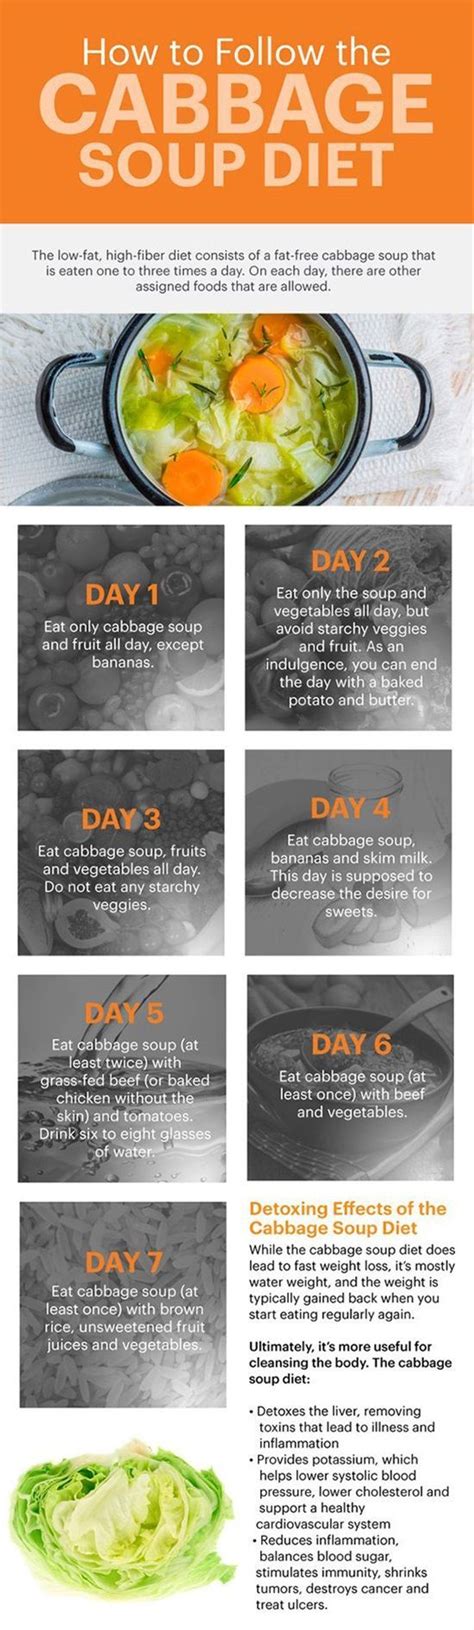 10 easy and effective diet plans to choose from cabbage soup diet cabbage diet soup diet